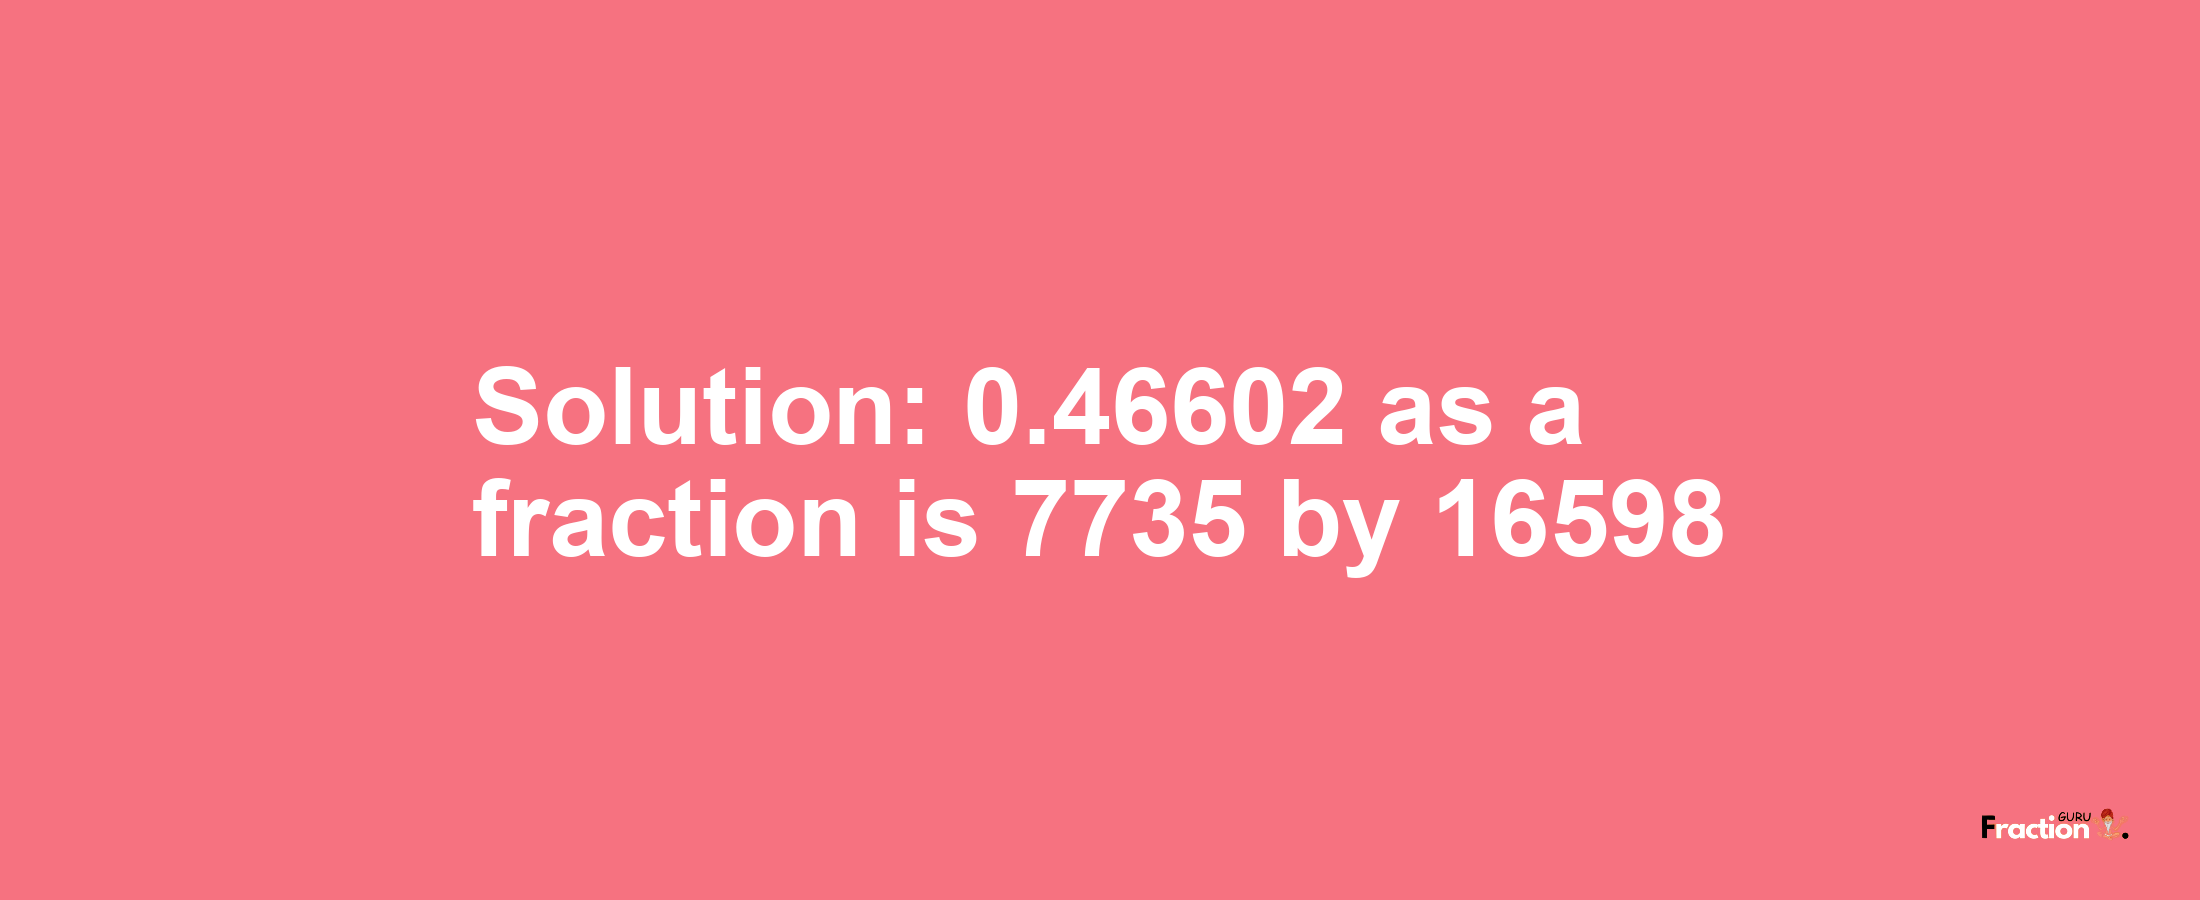 Solution:0.46602 as a fraction is 7735/16598